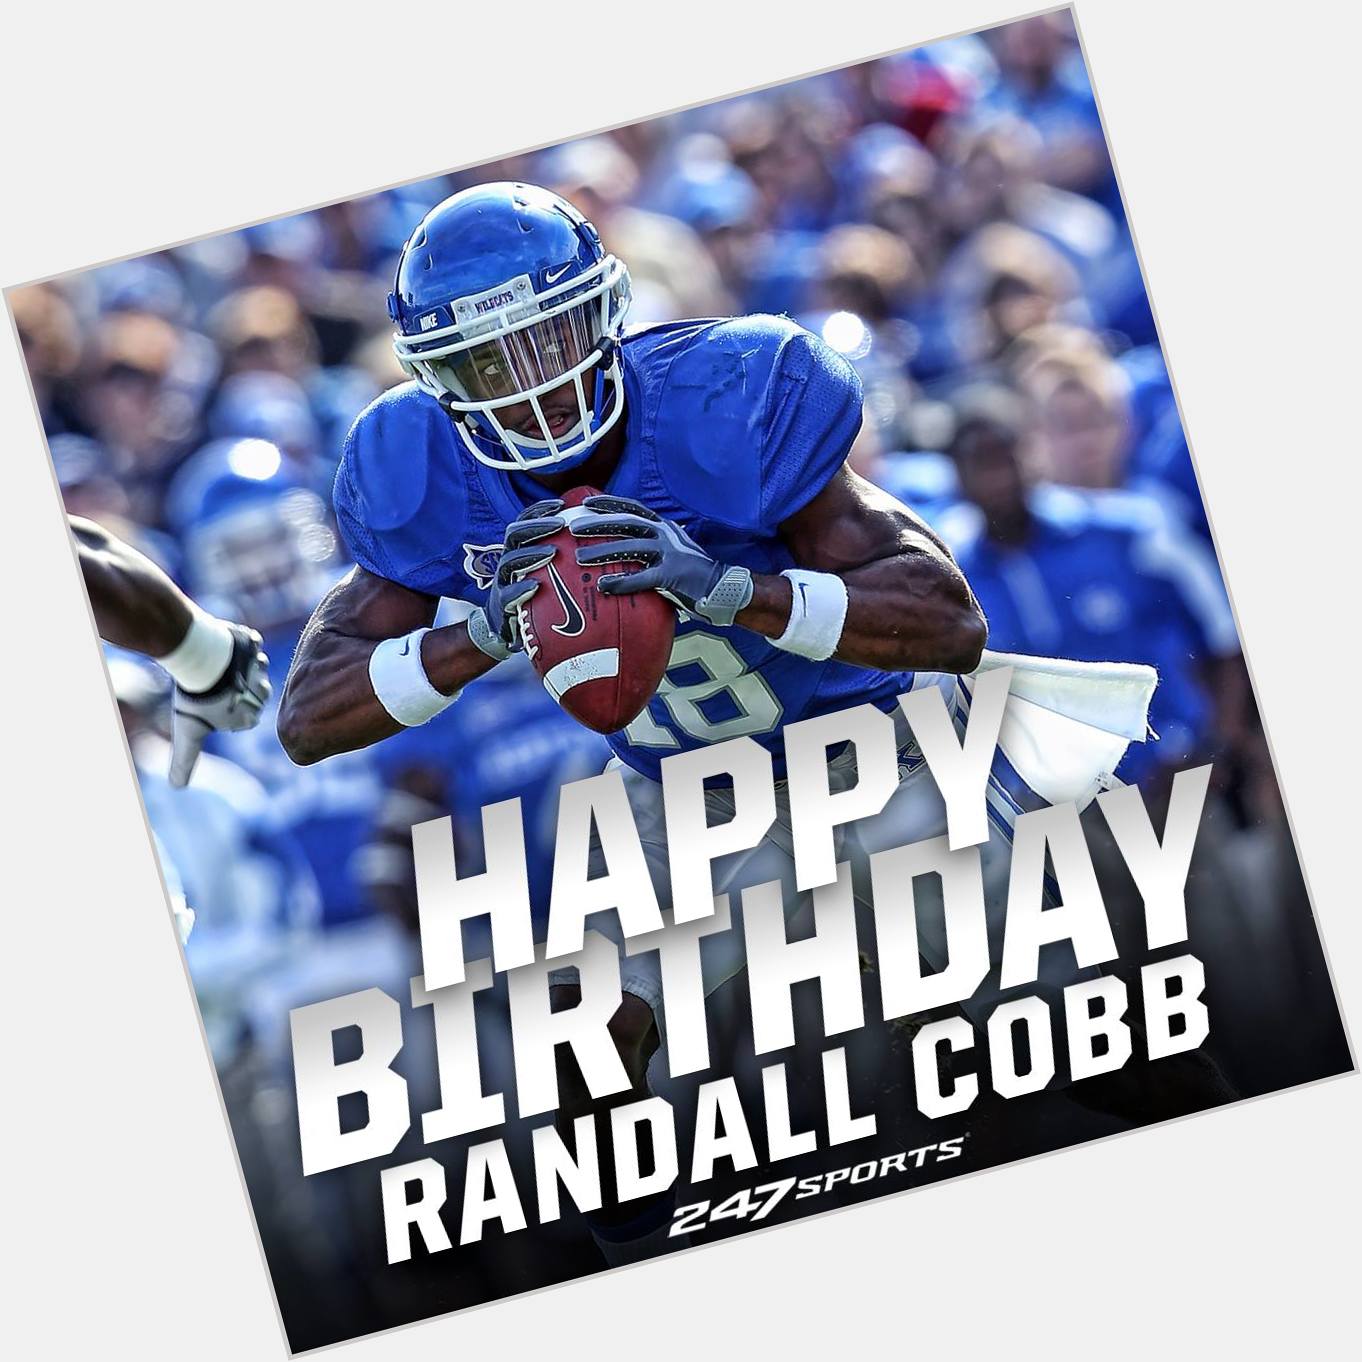 Happy birthday, Randall Cobb! One of the best to ever do it at Kentucky. 